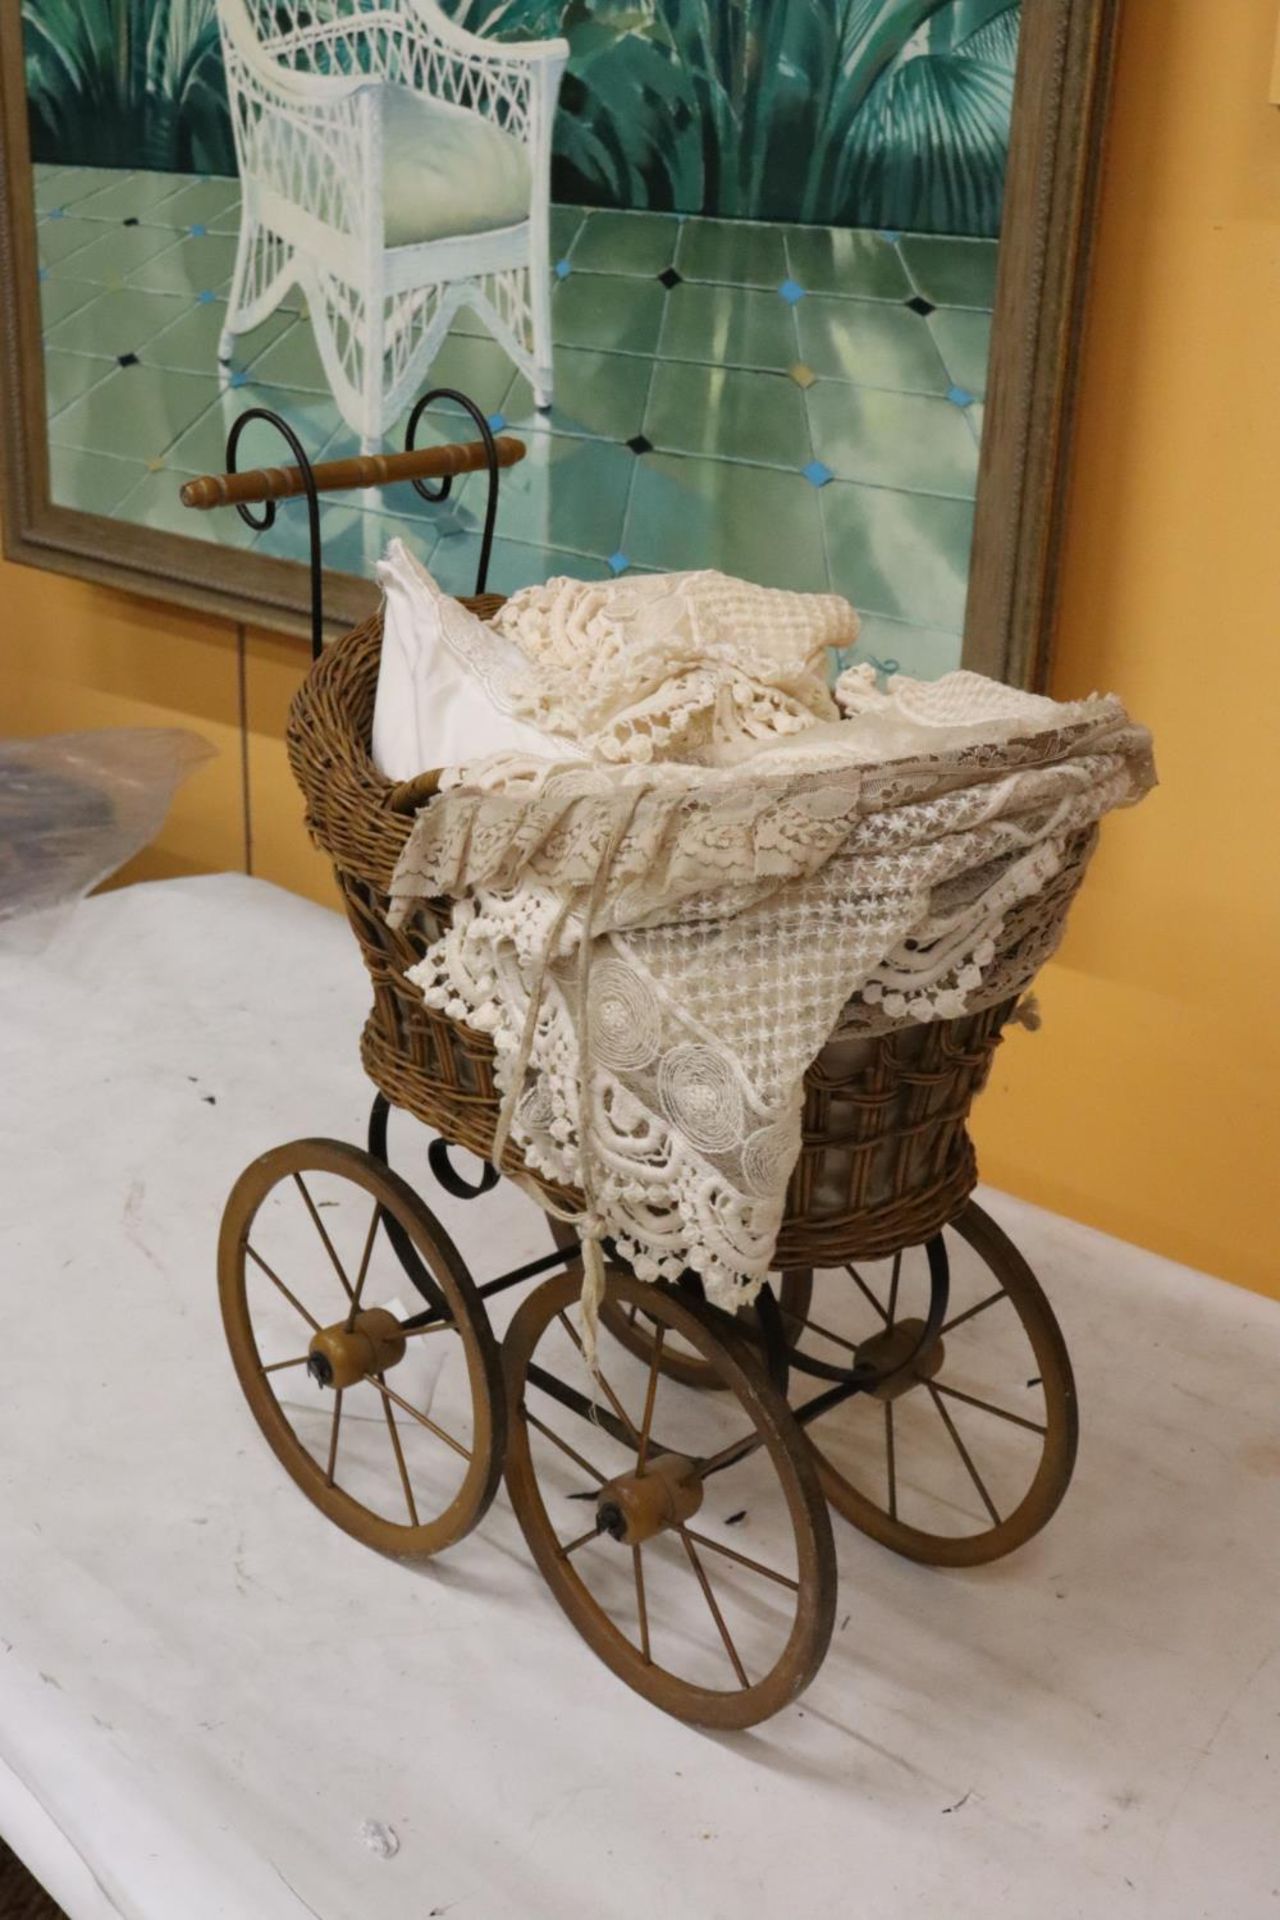 A VICTORIAN CHILD'S PRAM WITH LACE COVERS - Image 2 of 5